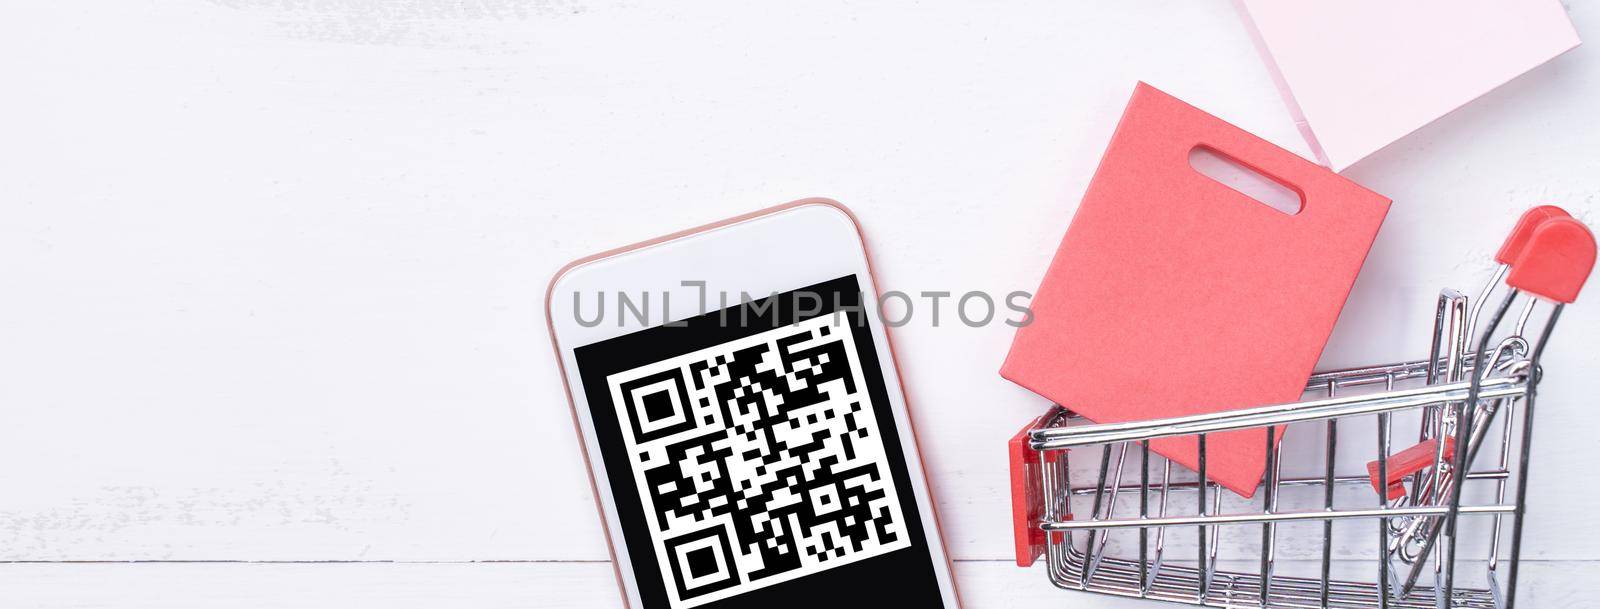 Abstract online shopping, mobile payment with QR code design concept element, colorful cart, paper bag on wooden table background, top view, flat lay by ROMIXIMAGE